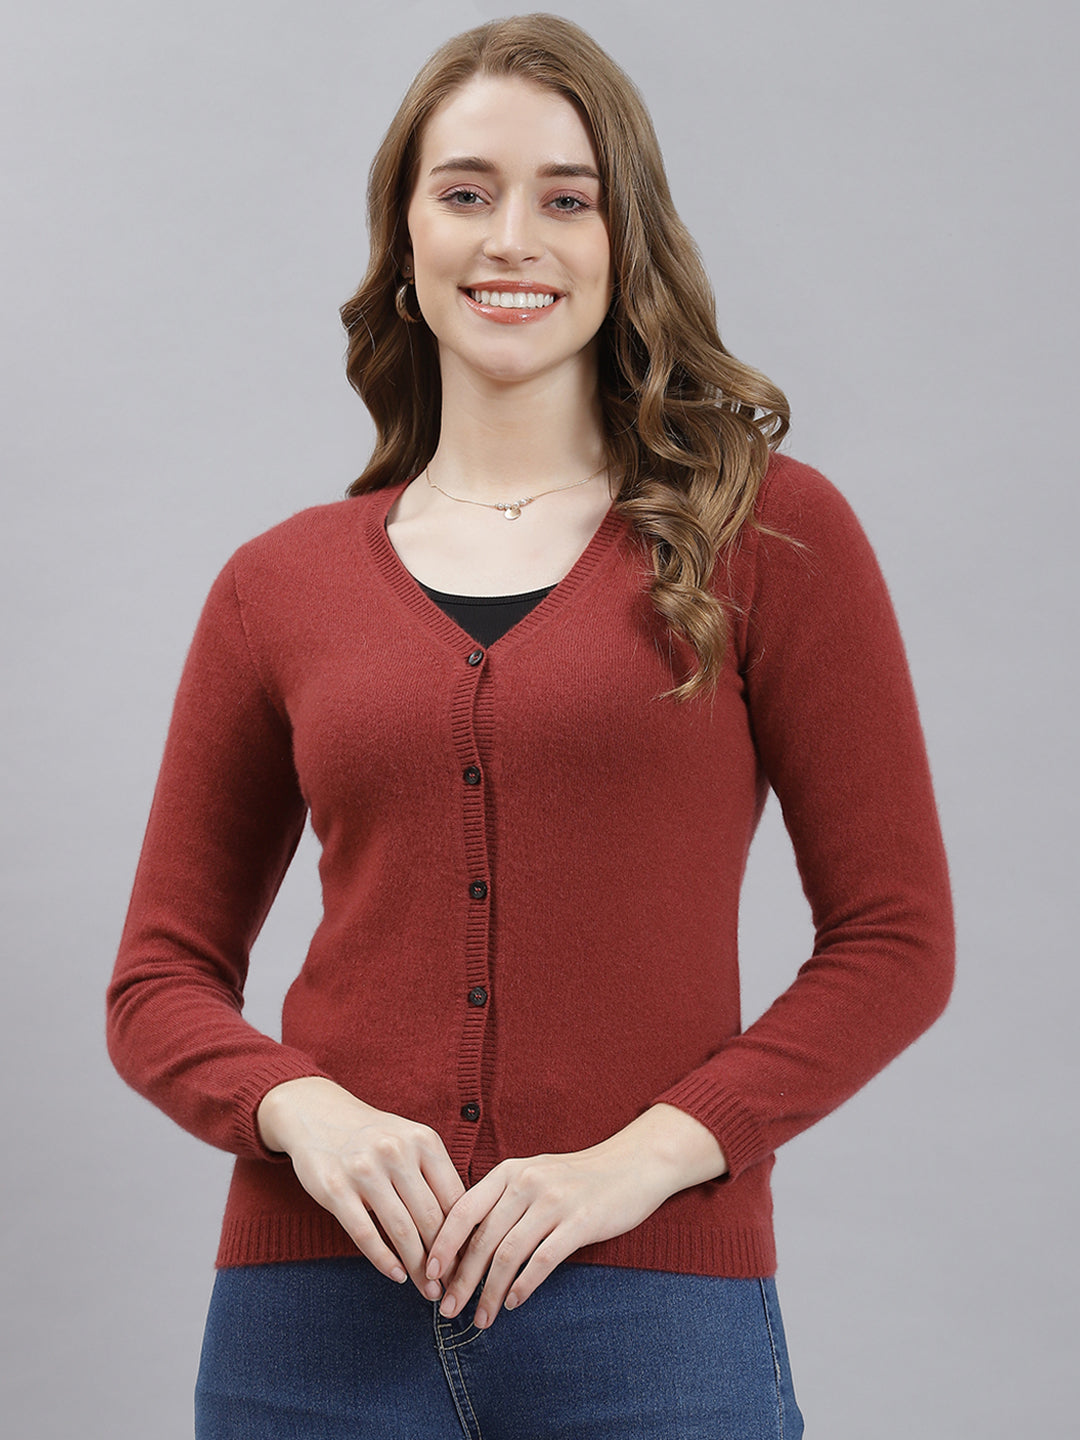 Buy Women Red Solid Cardigan Online in India - Monte Carlo